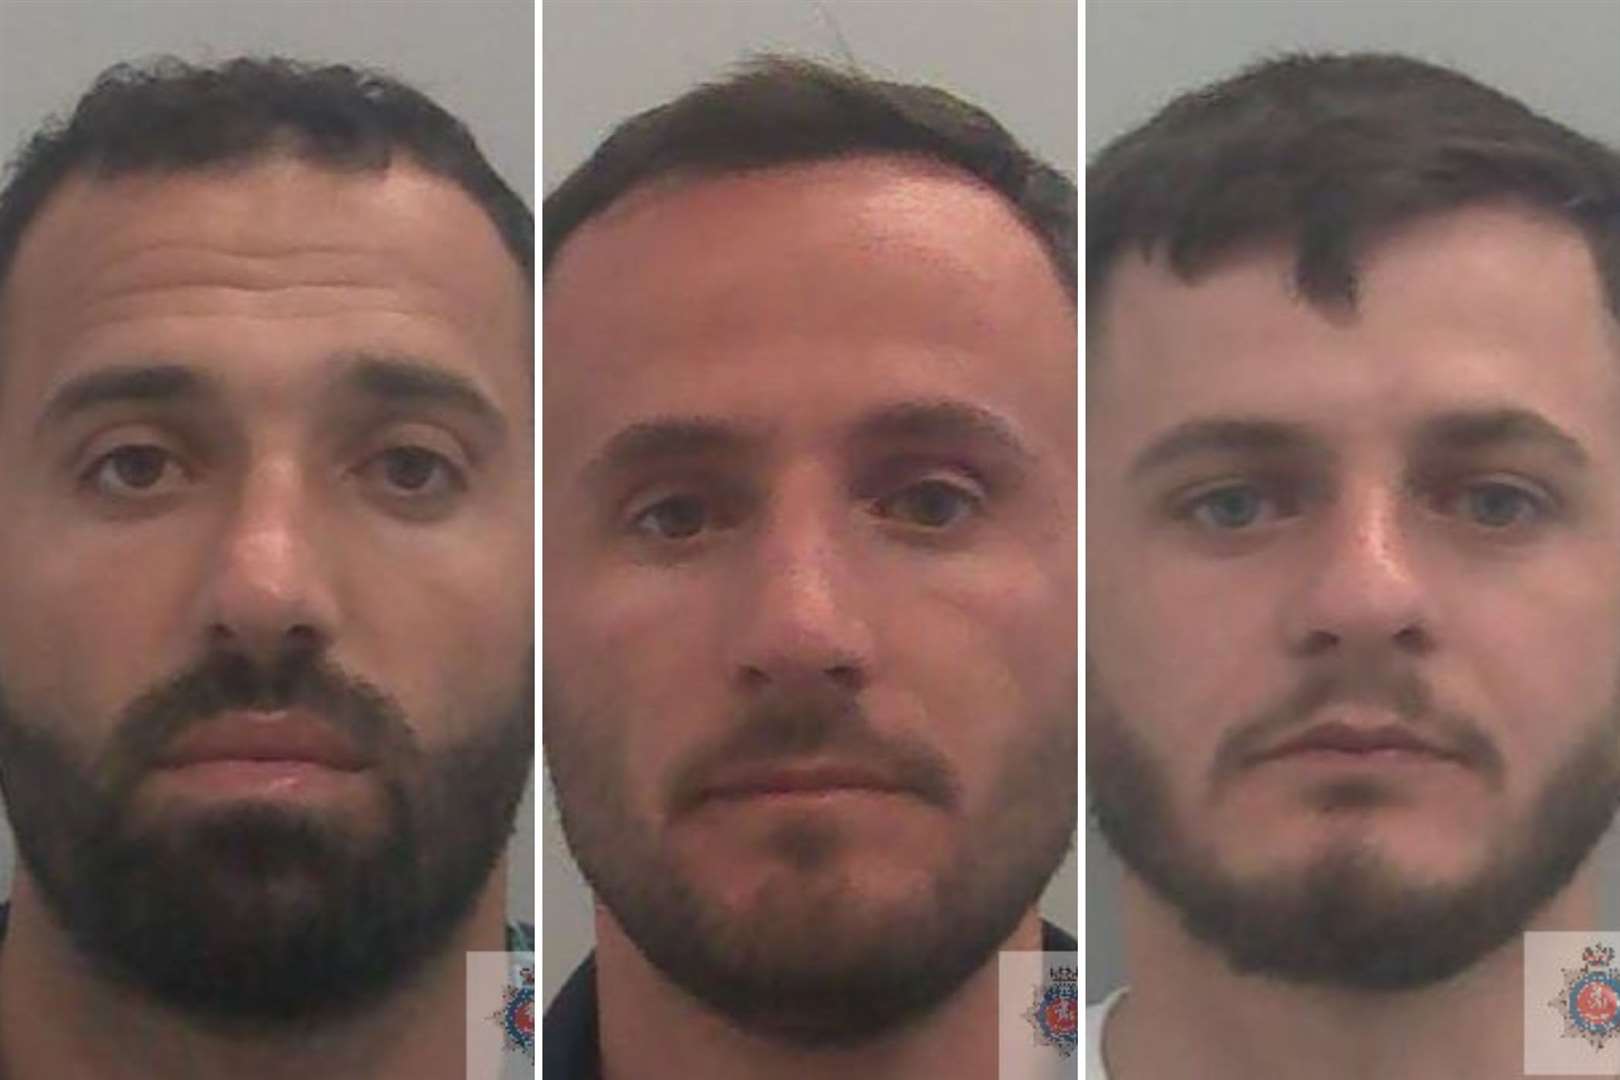 Ndue Paluca, from Sheerness, Hekuran Perhati, from Ashford, and Doris Perhati, from Maidstone, are among those to have been jailed. Picture: Kent Police